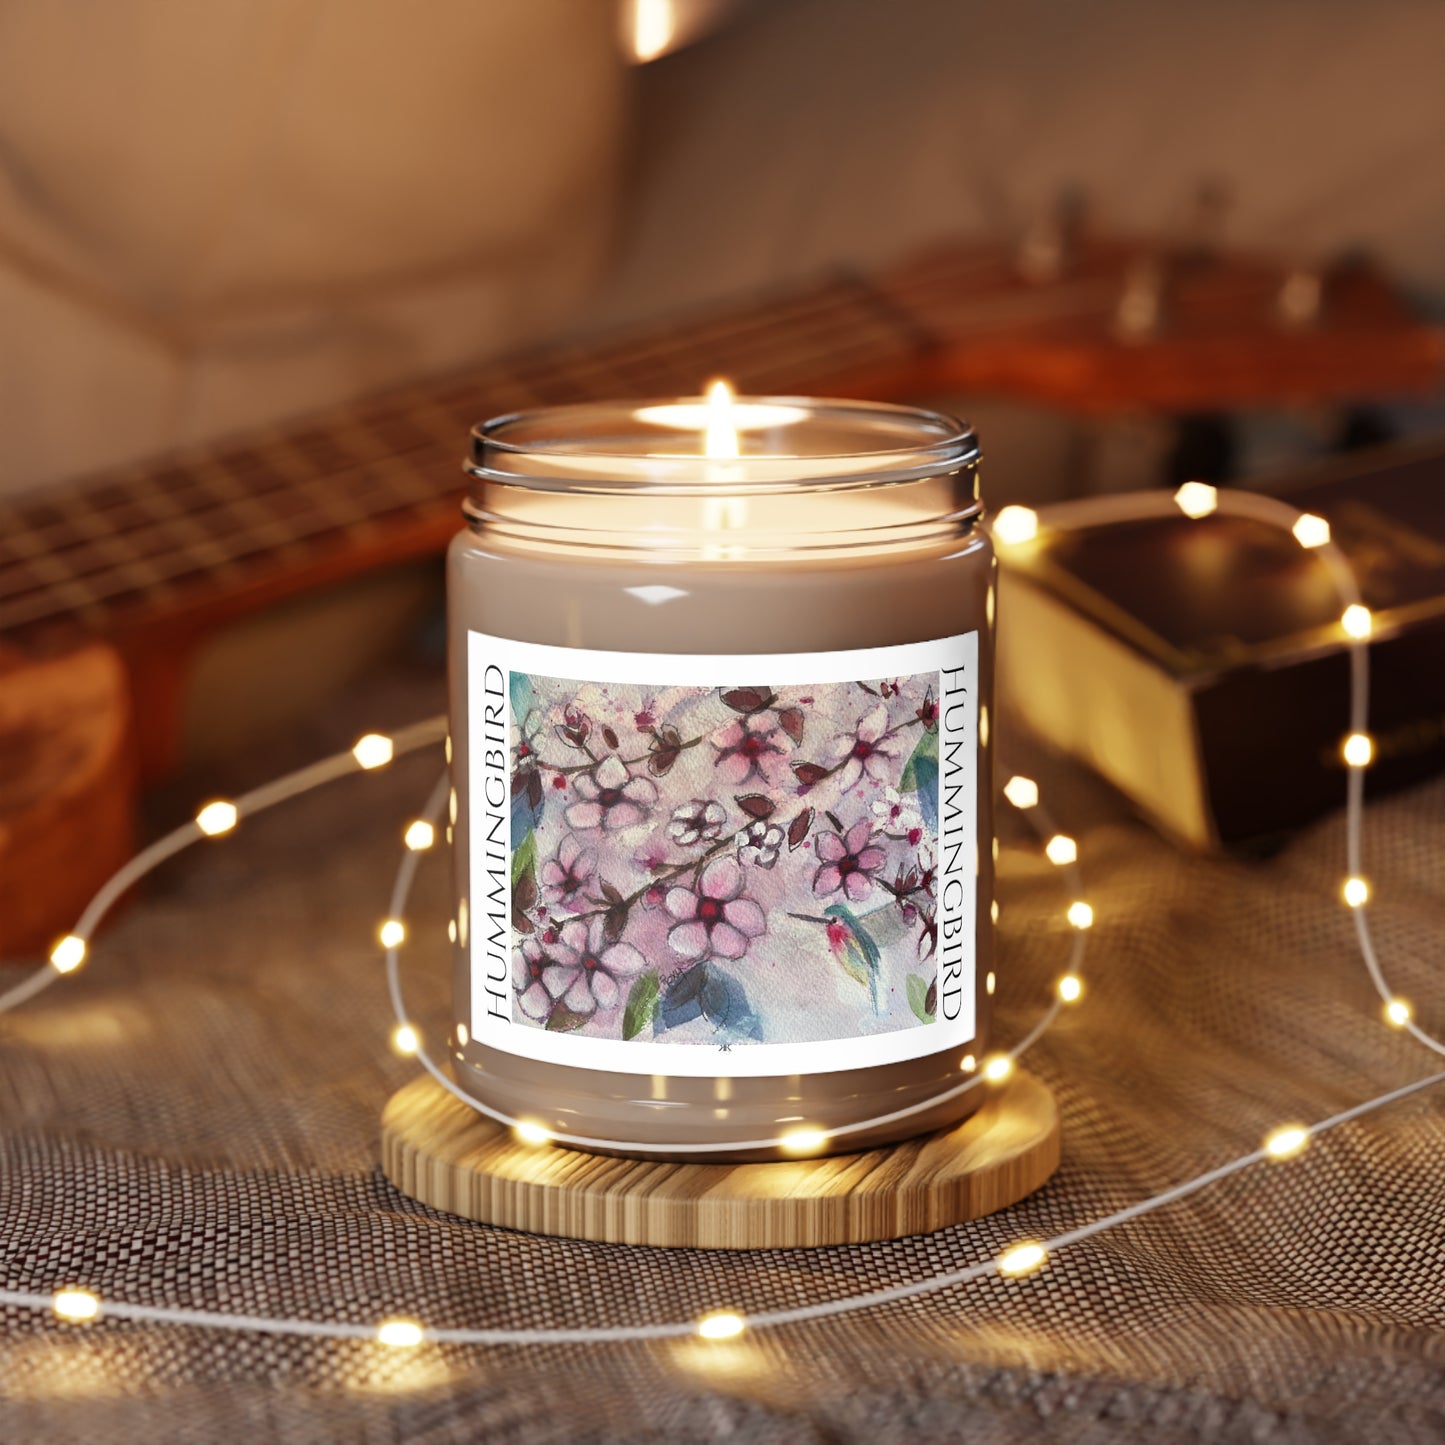 Hummingbird in Cherry Blossoms Scented Candle 9oz